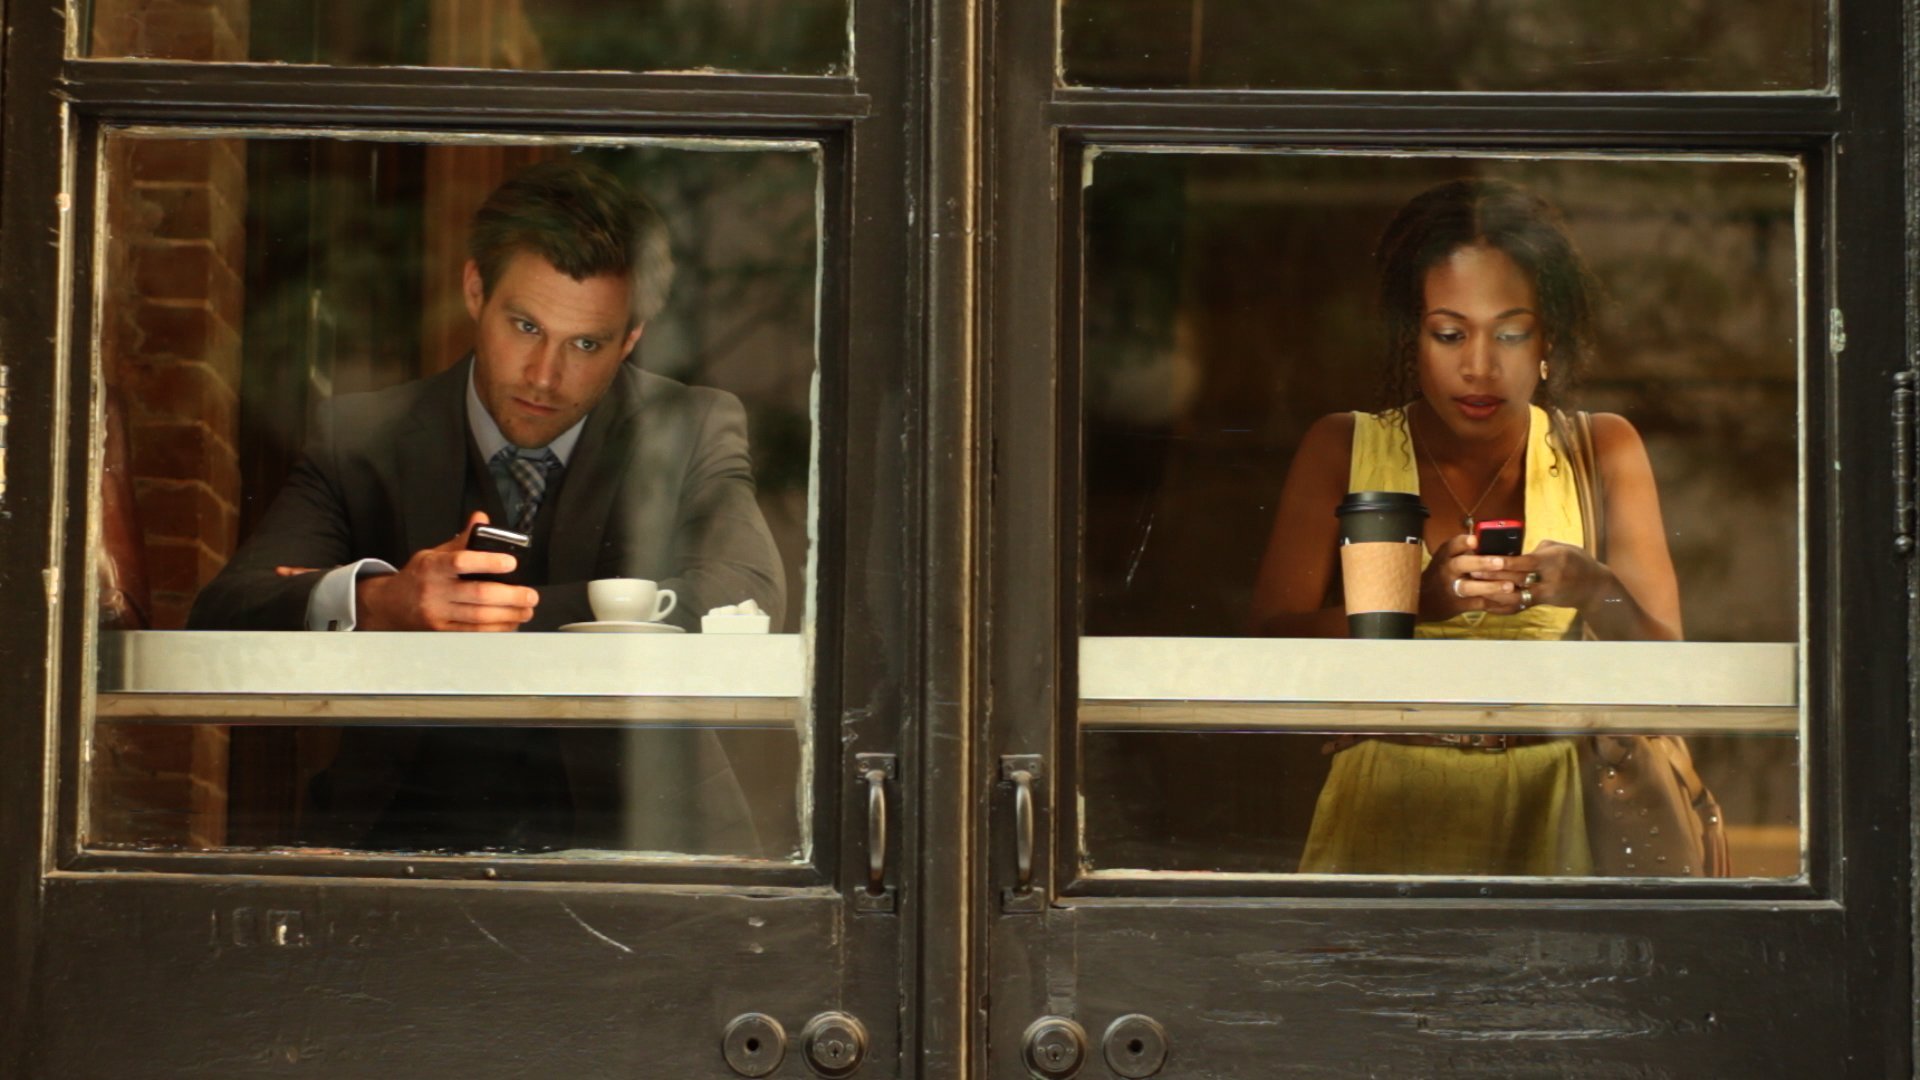 MY LAST DAY WITHOUT YOU production still of leads Ken Duken and Nicole Beharie.